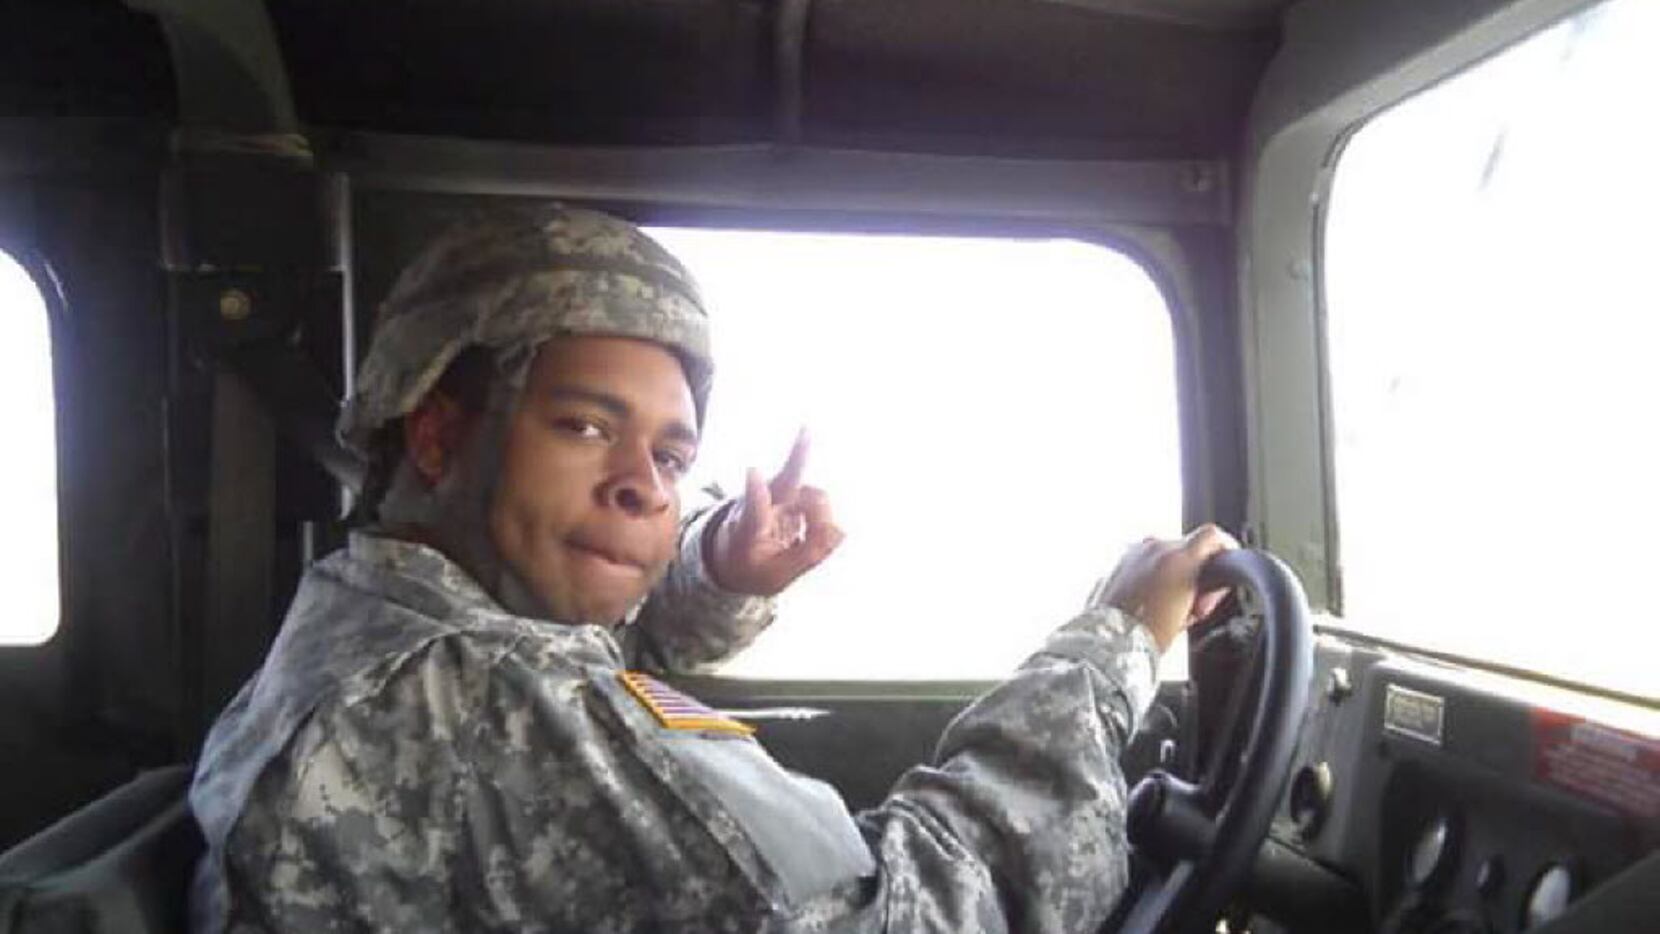 A soldier who served in the Army with Micah Johnson posted this photo of him on Facebook. 